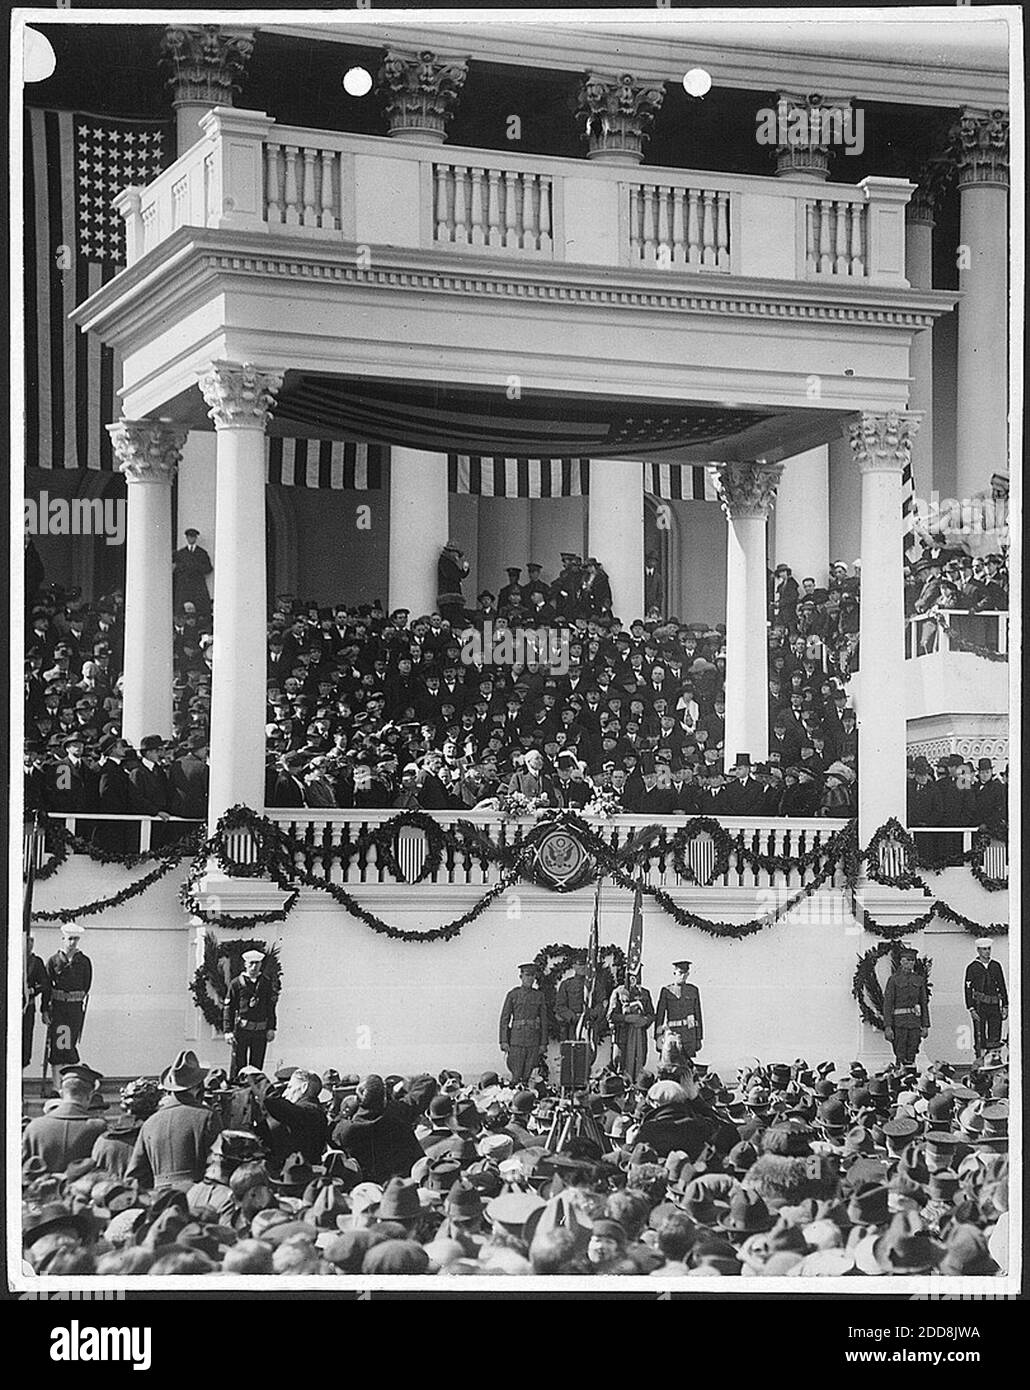 NO FILM, NO VIDEO, NO TV, NO DOCUMENTARY - President Warren G. Harding delivers his inaugural address on east portico of the U.S. Capitol in Washington, D.C., USA on March 4, 1921. Photo by Library of Congress/MCT/ABACAPRESS.COM Stock Photo